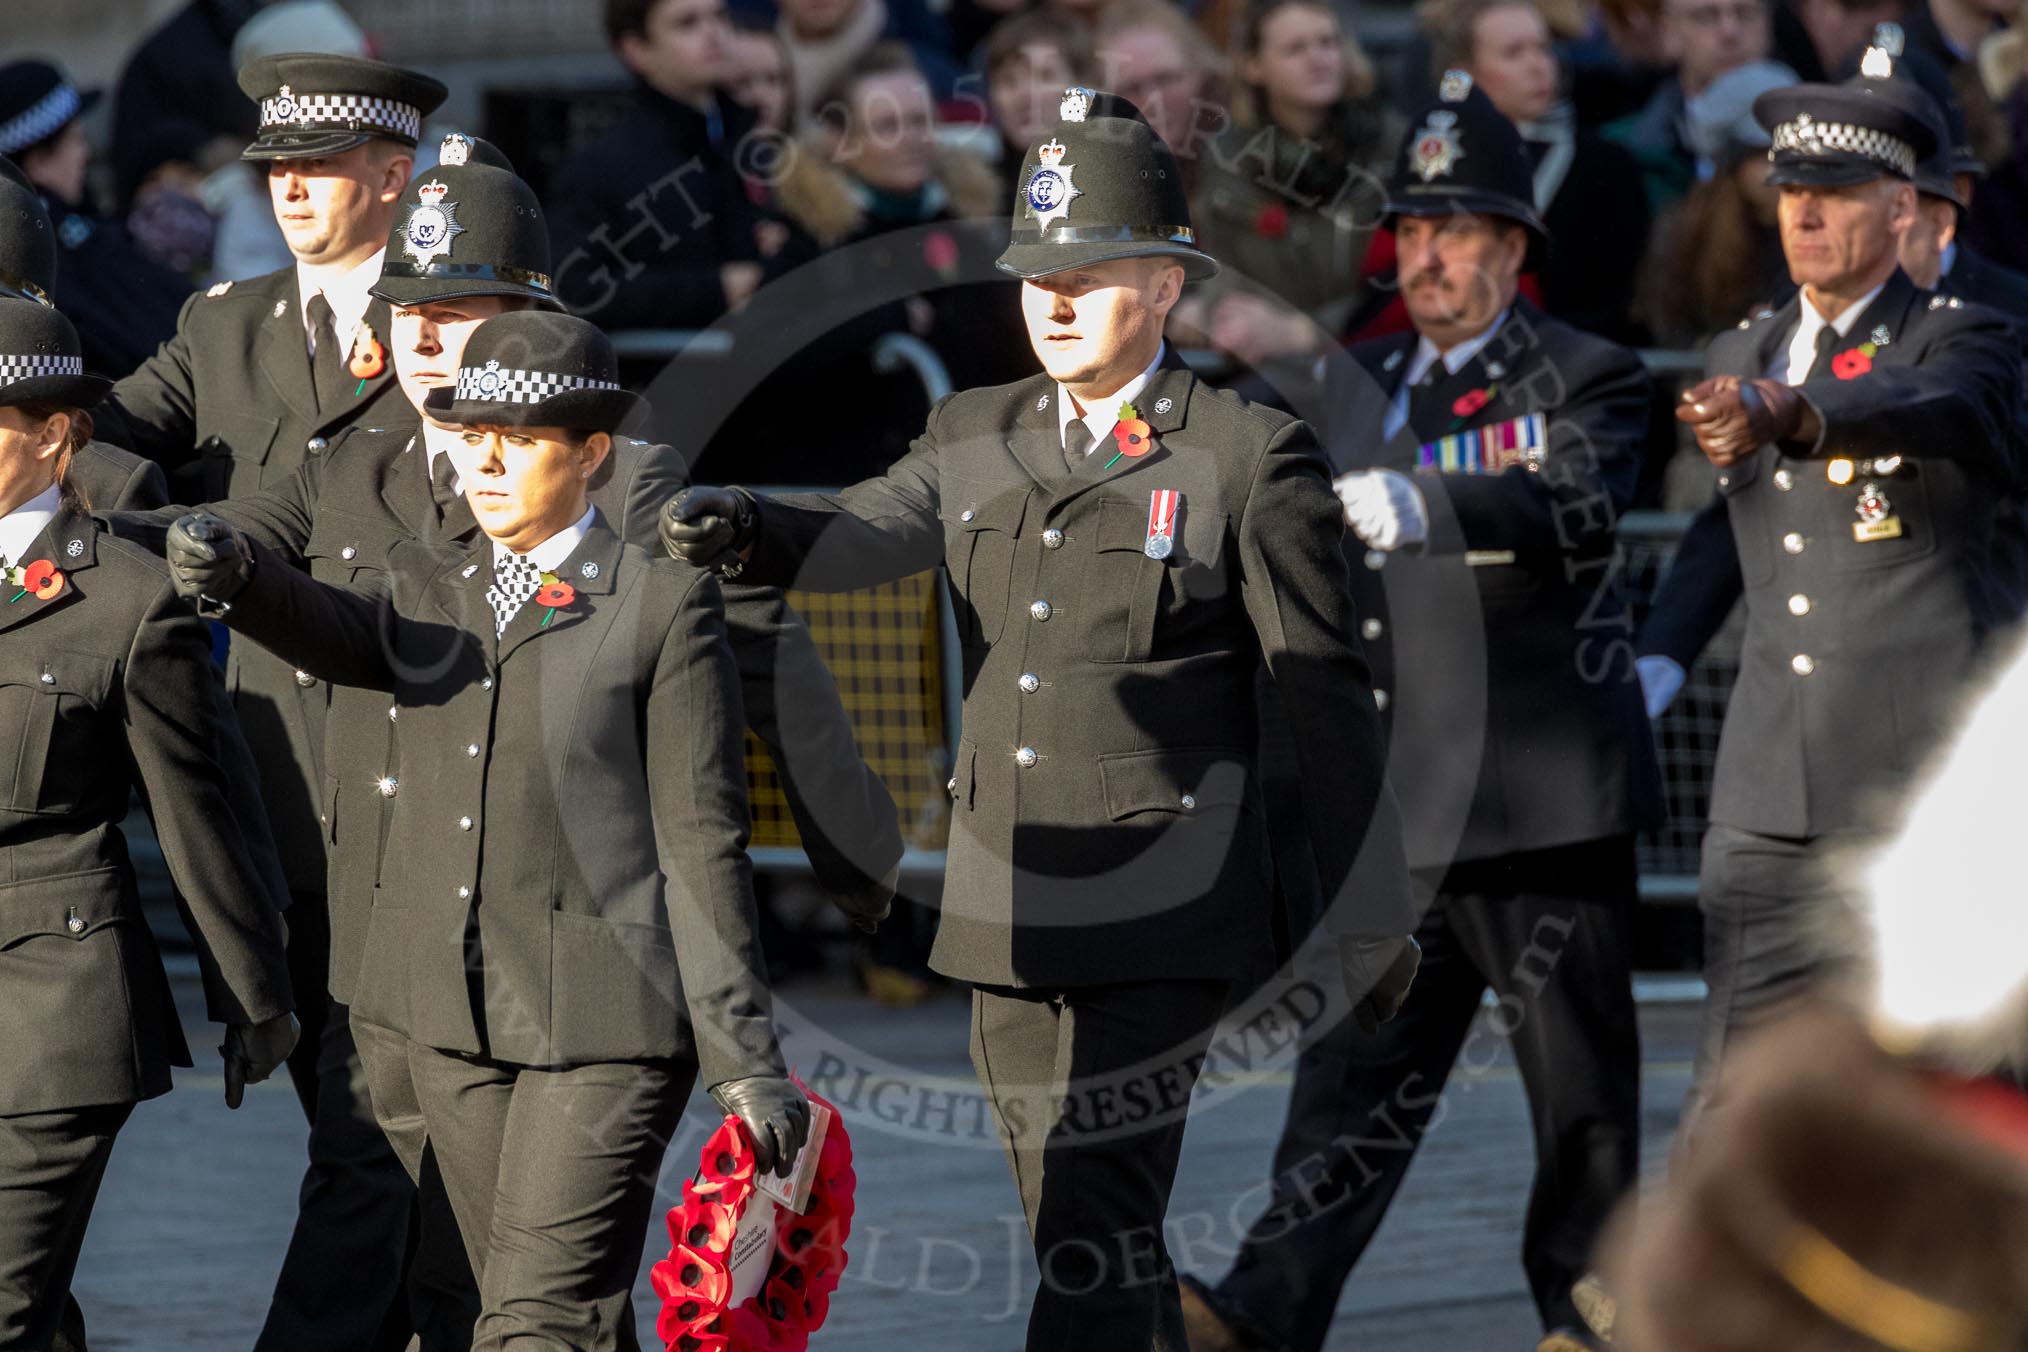 March Past, Remembrance Sunday at the Cenotaph 2016: M39 Kent Police.
Cenotaph, Whitehall, London SW1,
London,
Greater London,
United Kingdom,
on 13 November 2016 at 13:19, image #2921